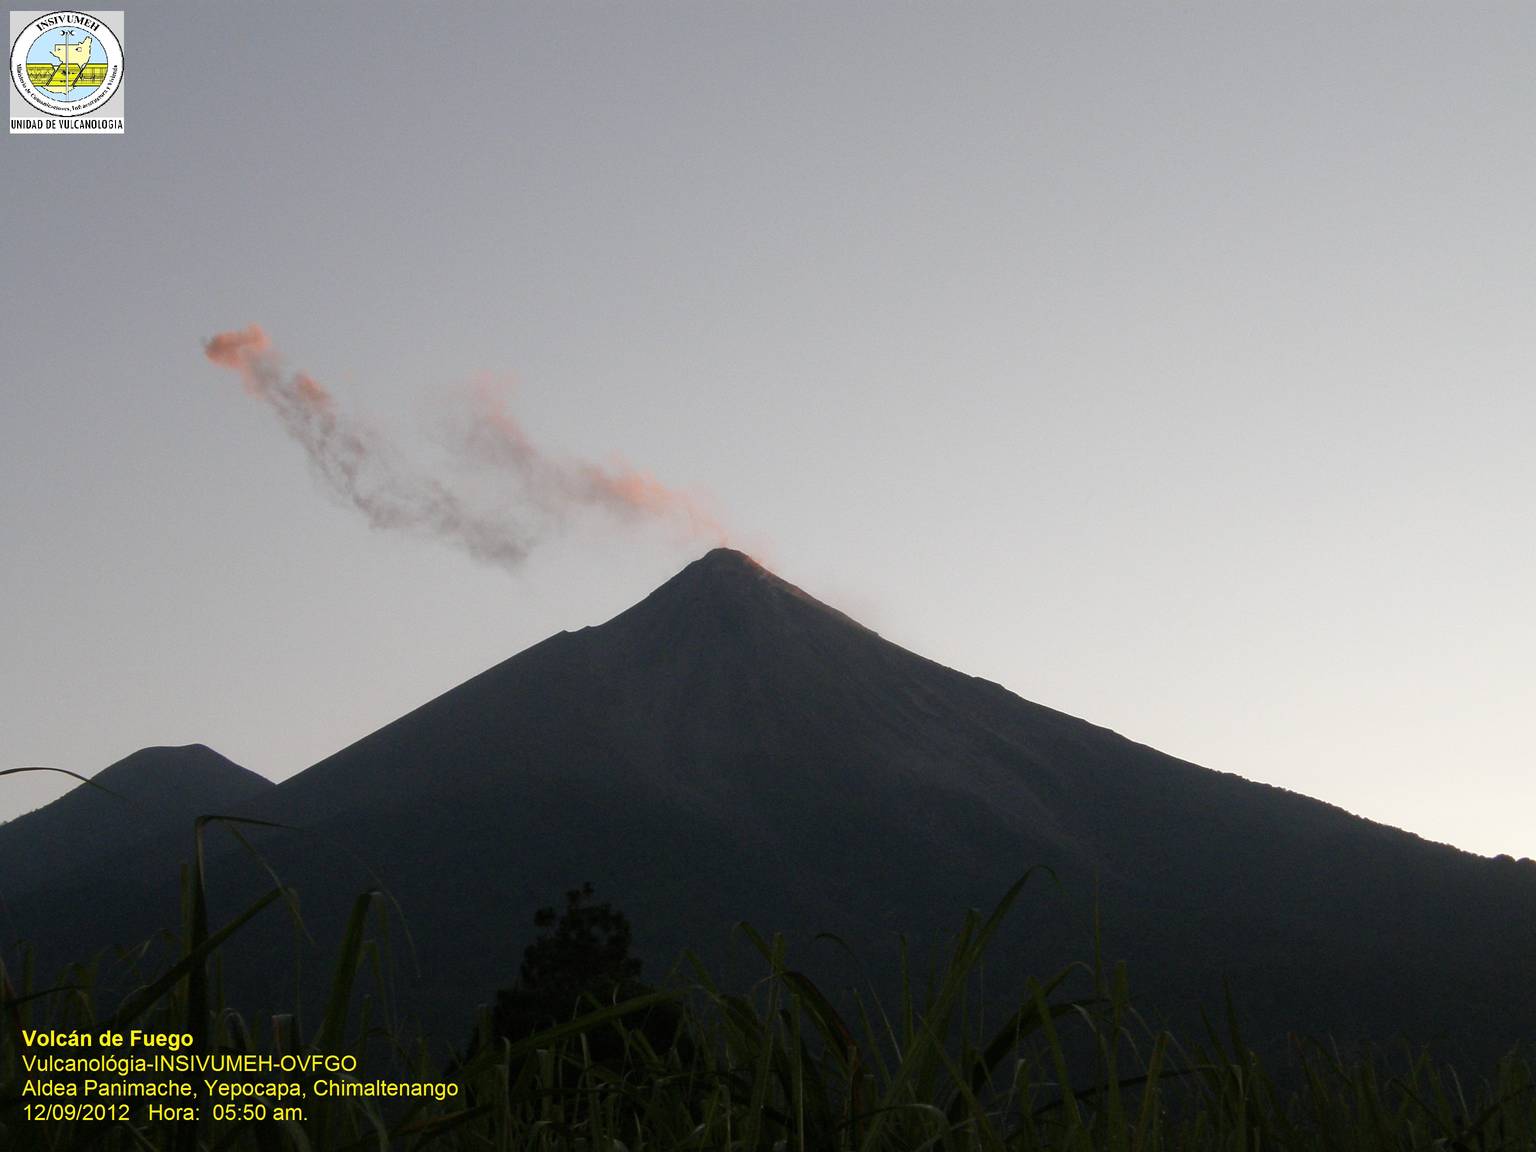 Fuego on the morning of 12 Sep 2012